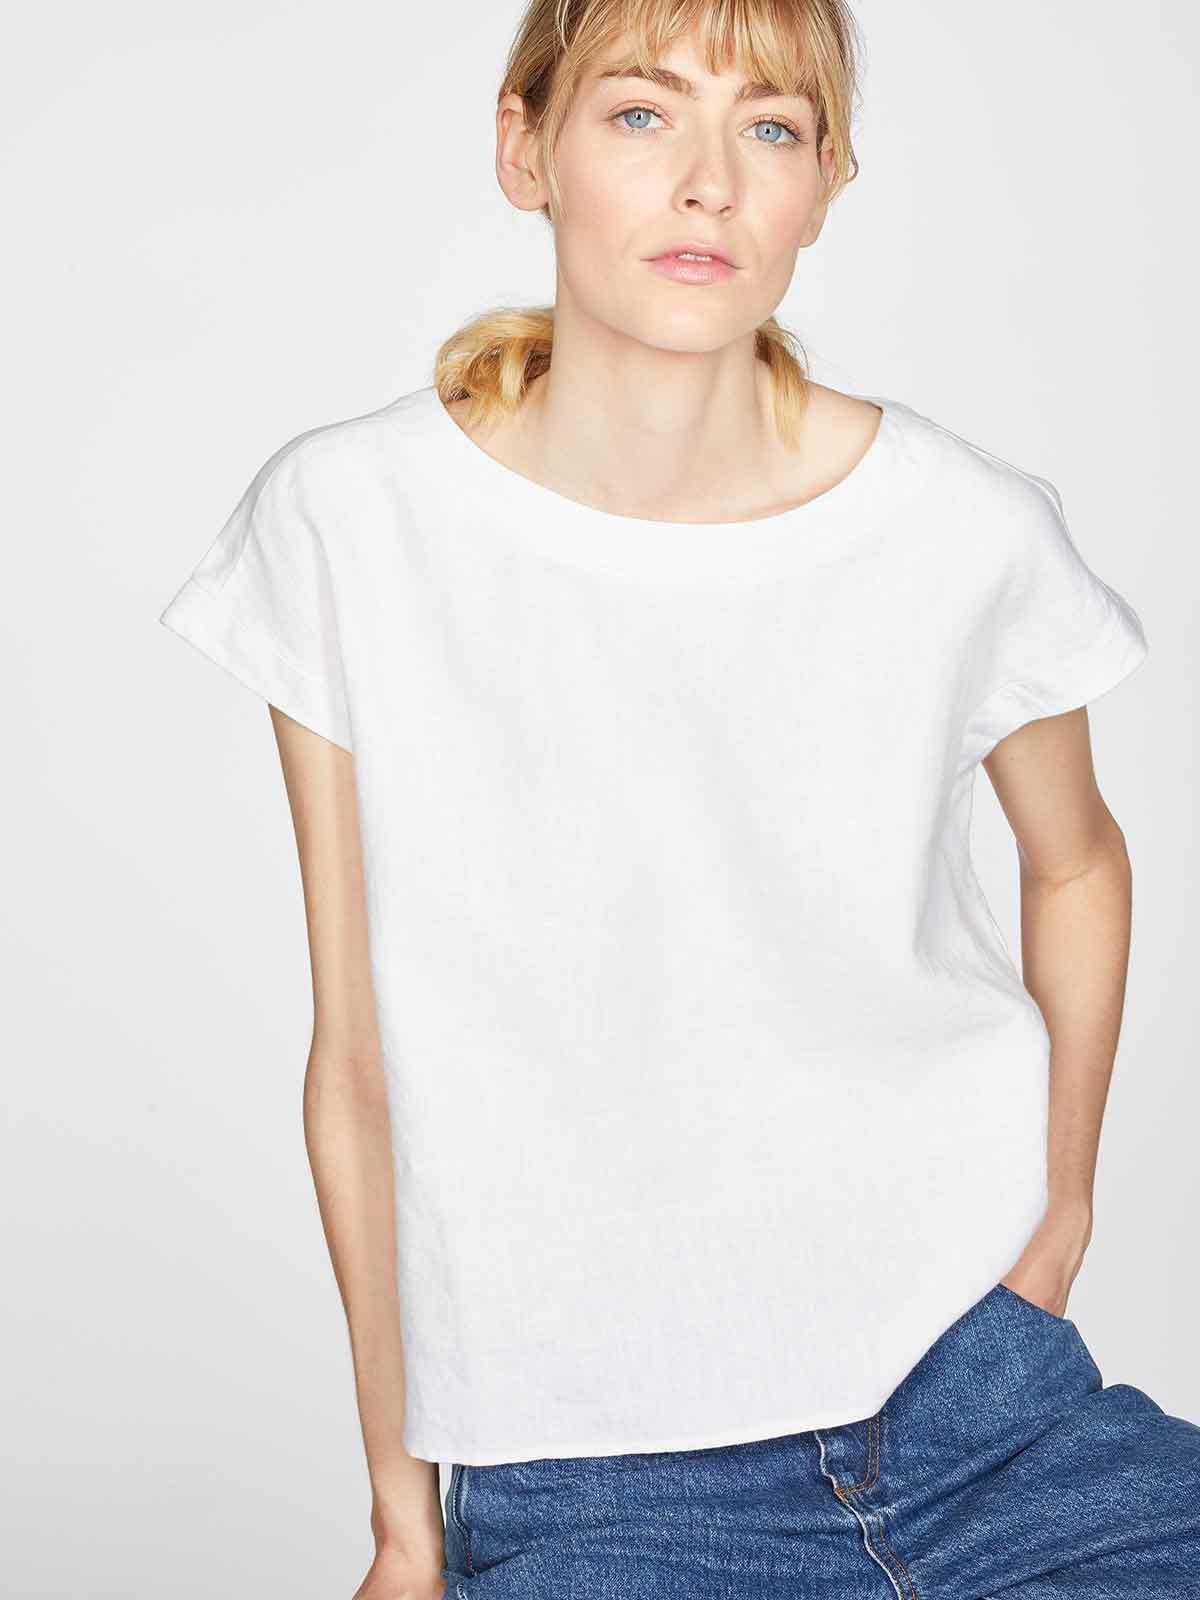 The Perfect Hemp Short Sleeve Shell Top - Thought Clothing UK